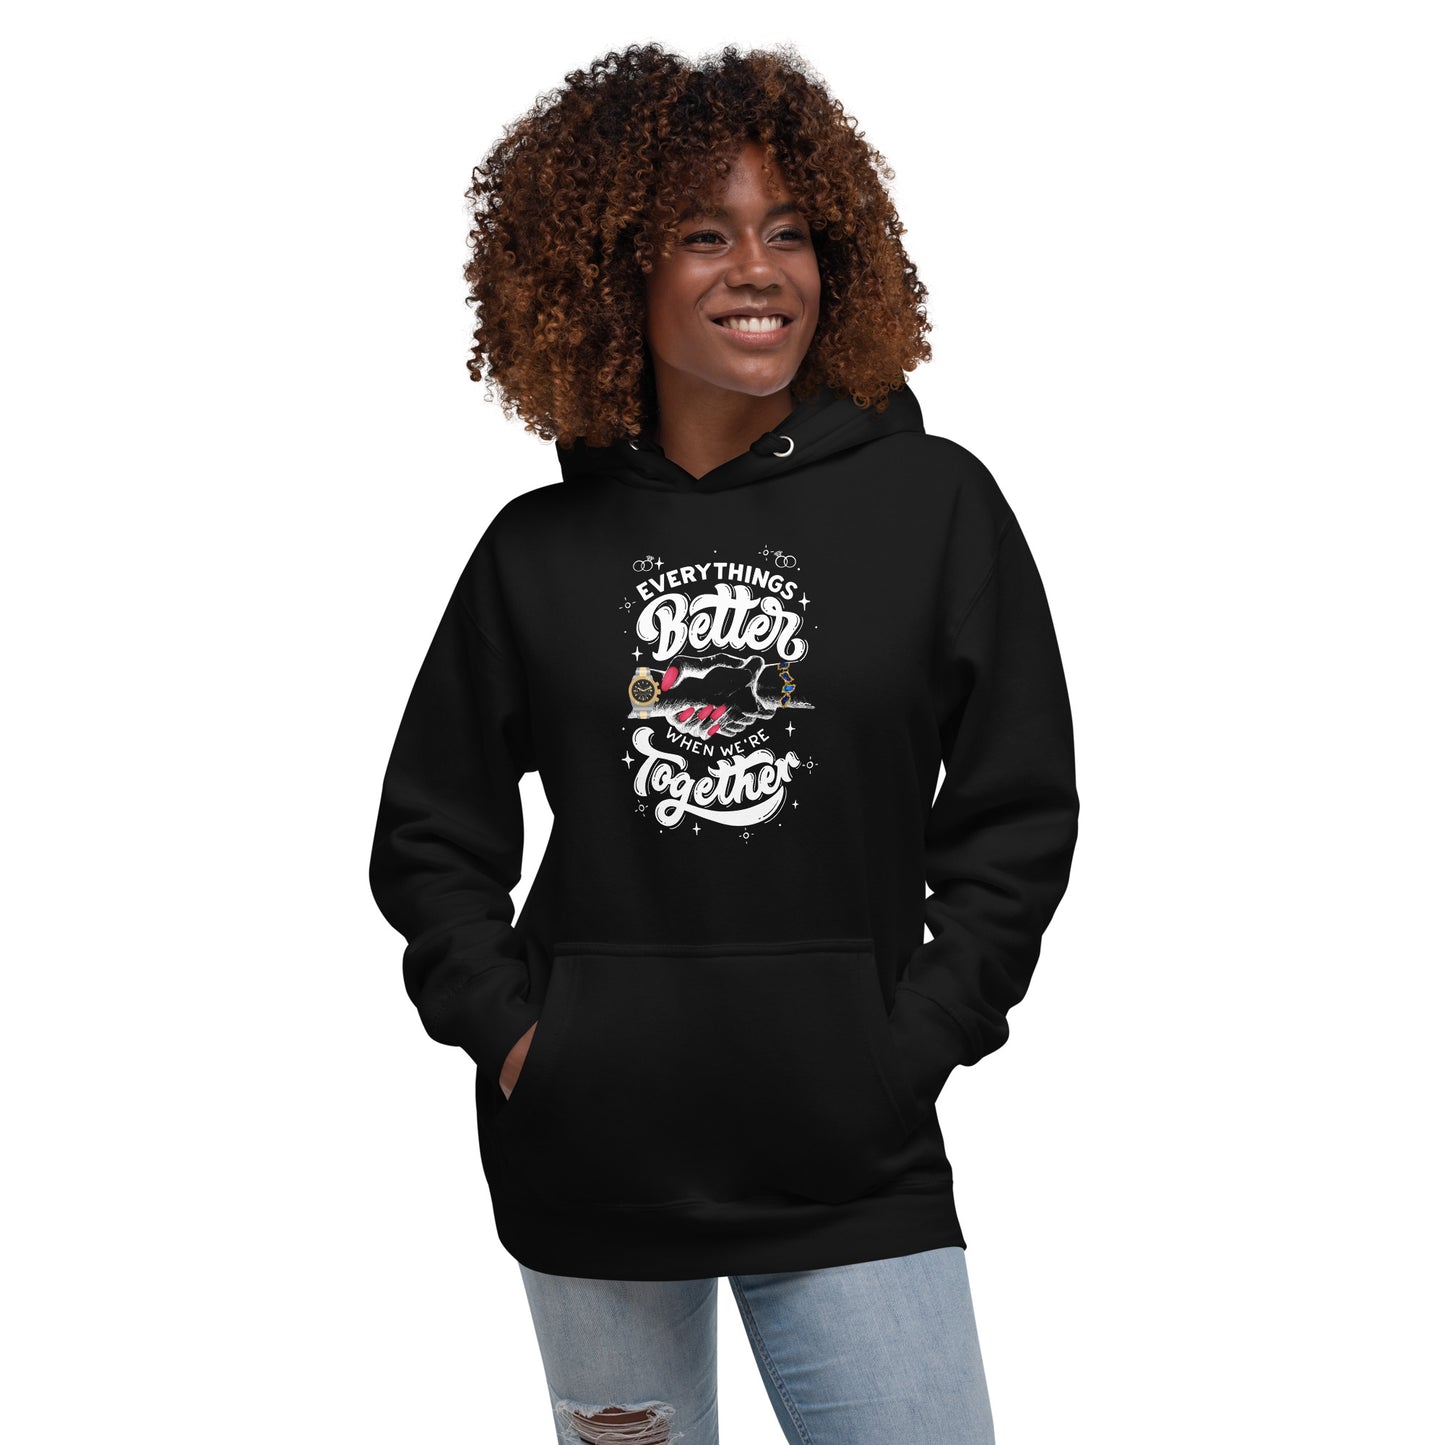 Everythings Better When We're Together Unisex Hoodie, Couple's Clothing, Relationship Clothing, Black Hoodies, Designer Hoodies, Marriage Apparel